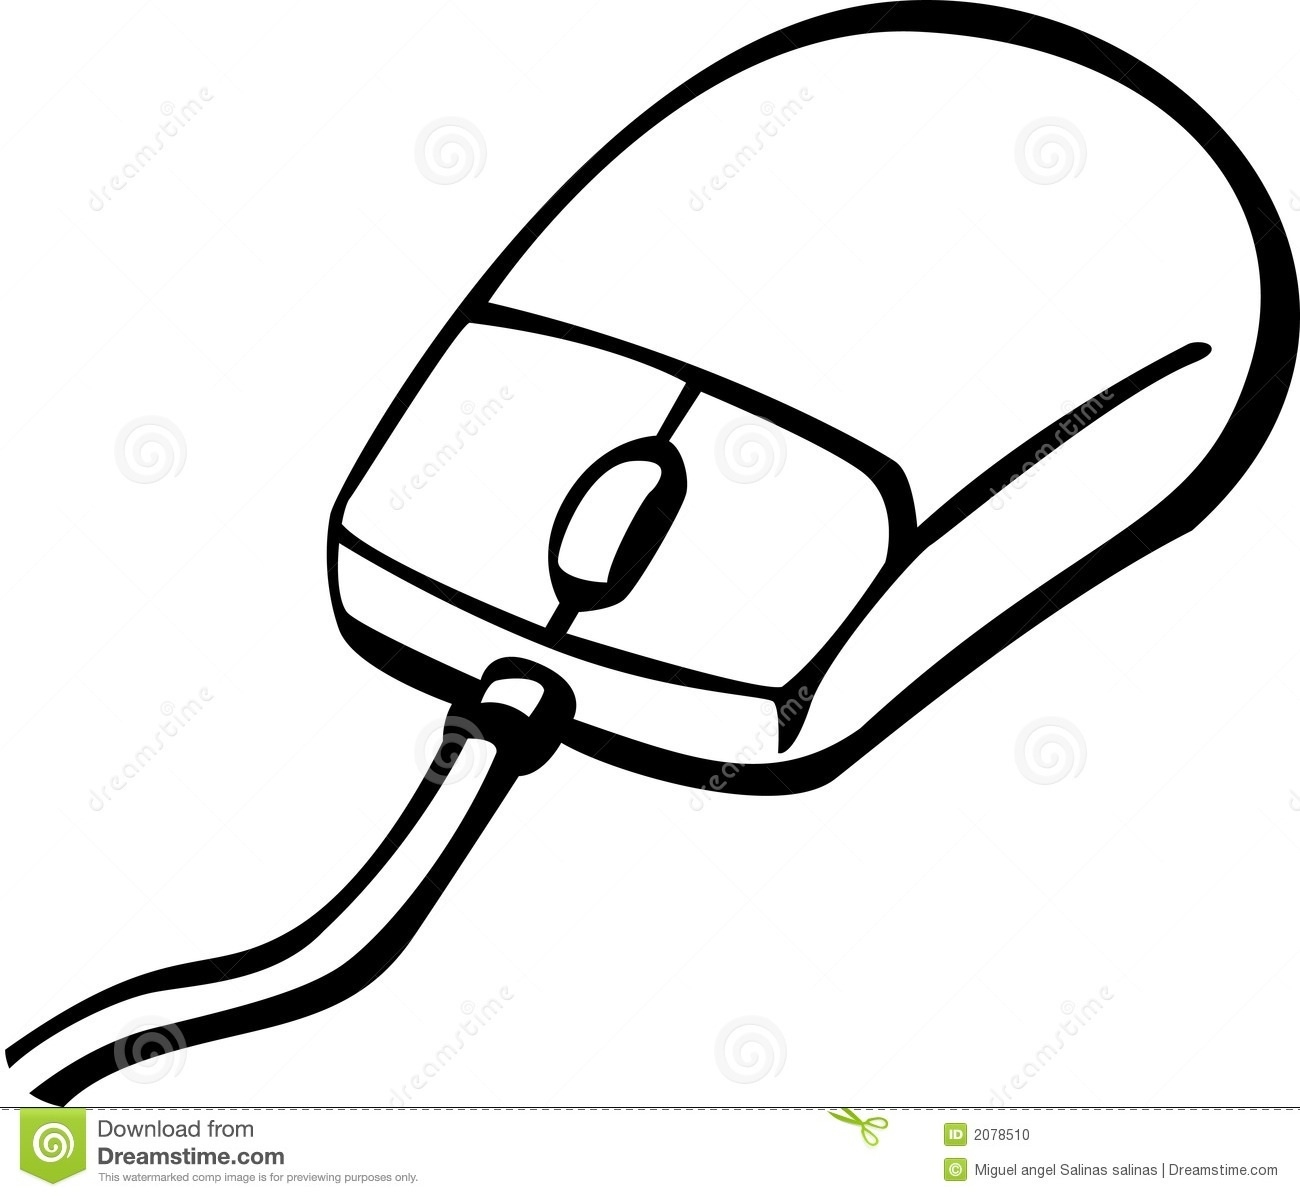 790 Computer Mouse free clipart.